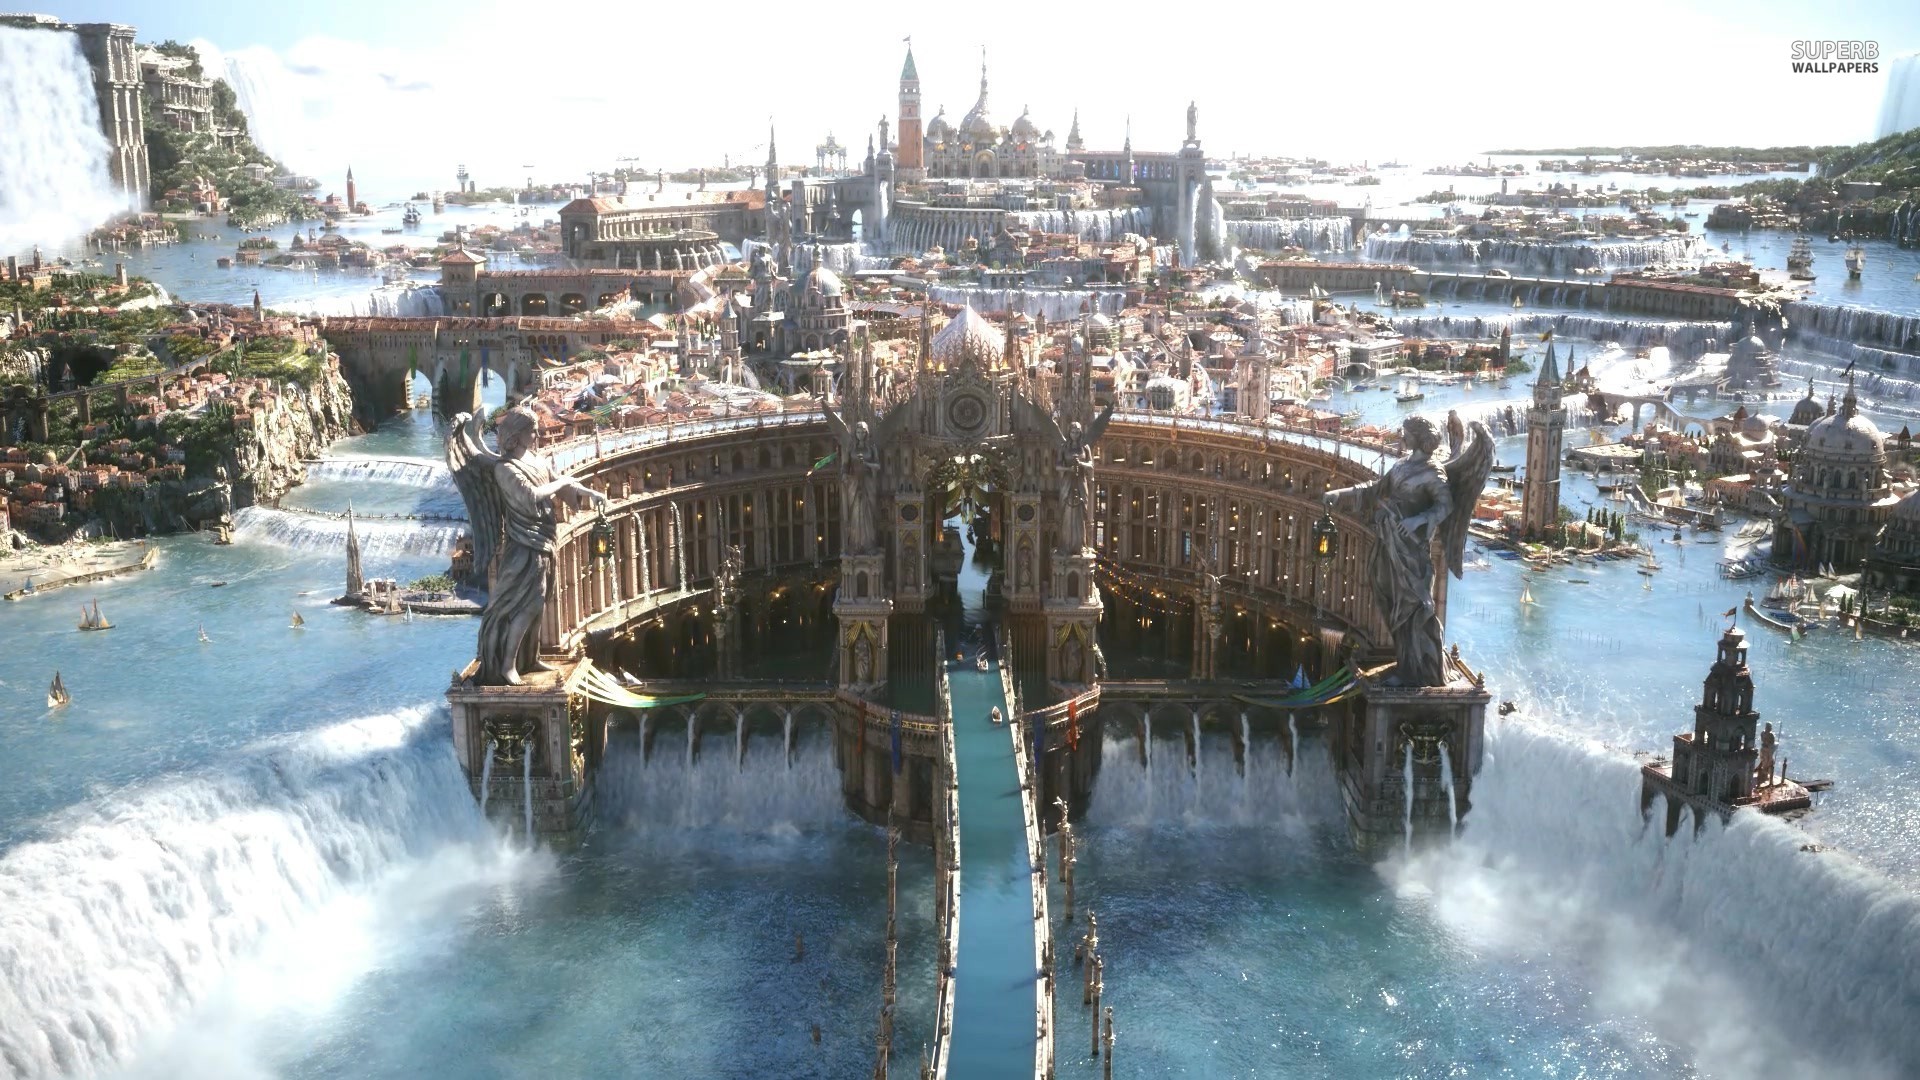 Final-Fantasy-XV-Offers-Another-PlayStation-4-Title-Trailer-No-New-Footage-425776-2